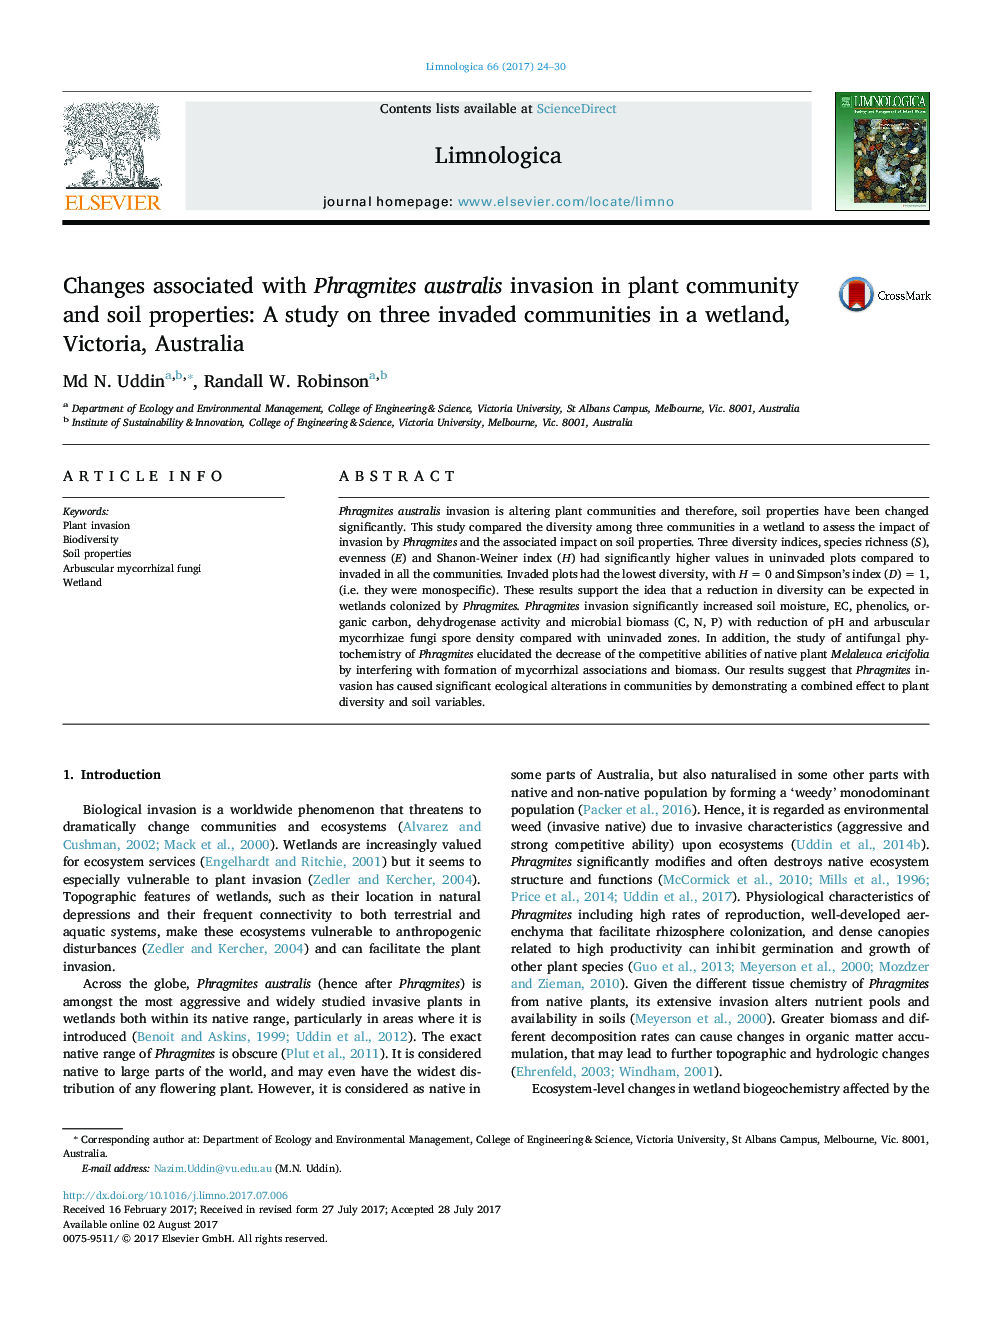 Changes associated with Phragmites australis invasion in plant community and soil properties: A study on three invaded communities in a wetland, Victoria, Australia